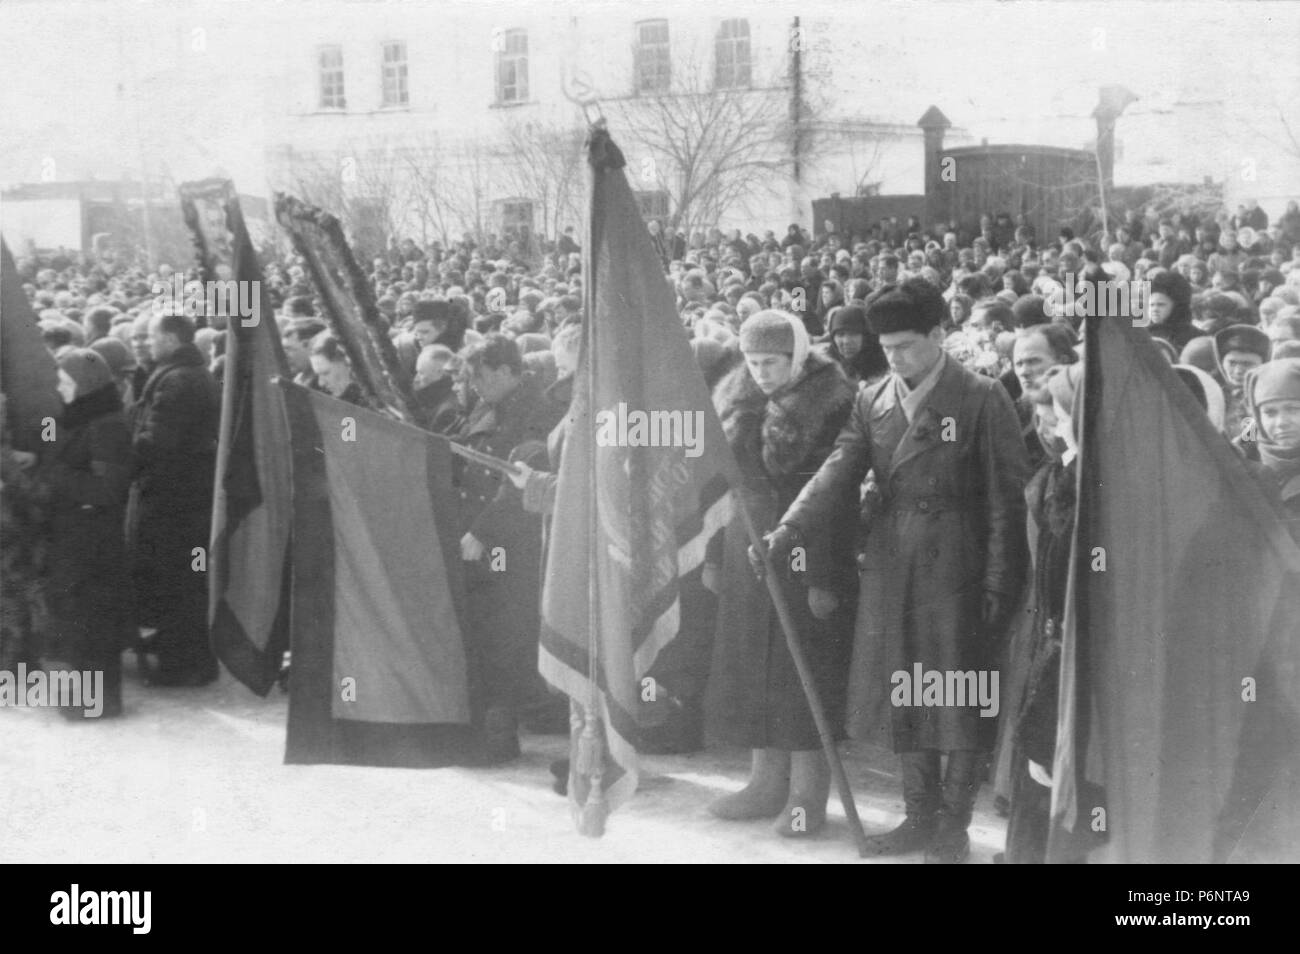 At a mourning rally about the death of Stalin in 1953. Stock Photo